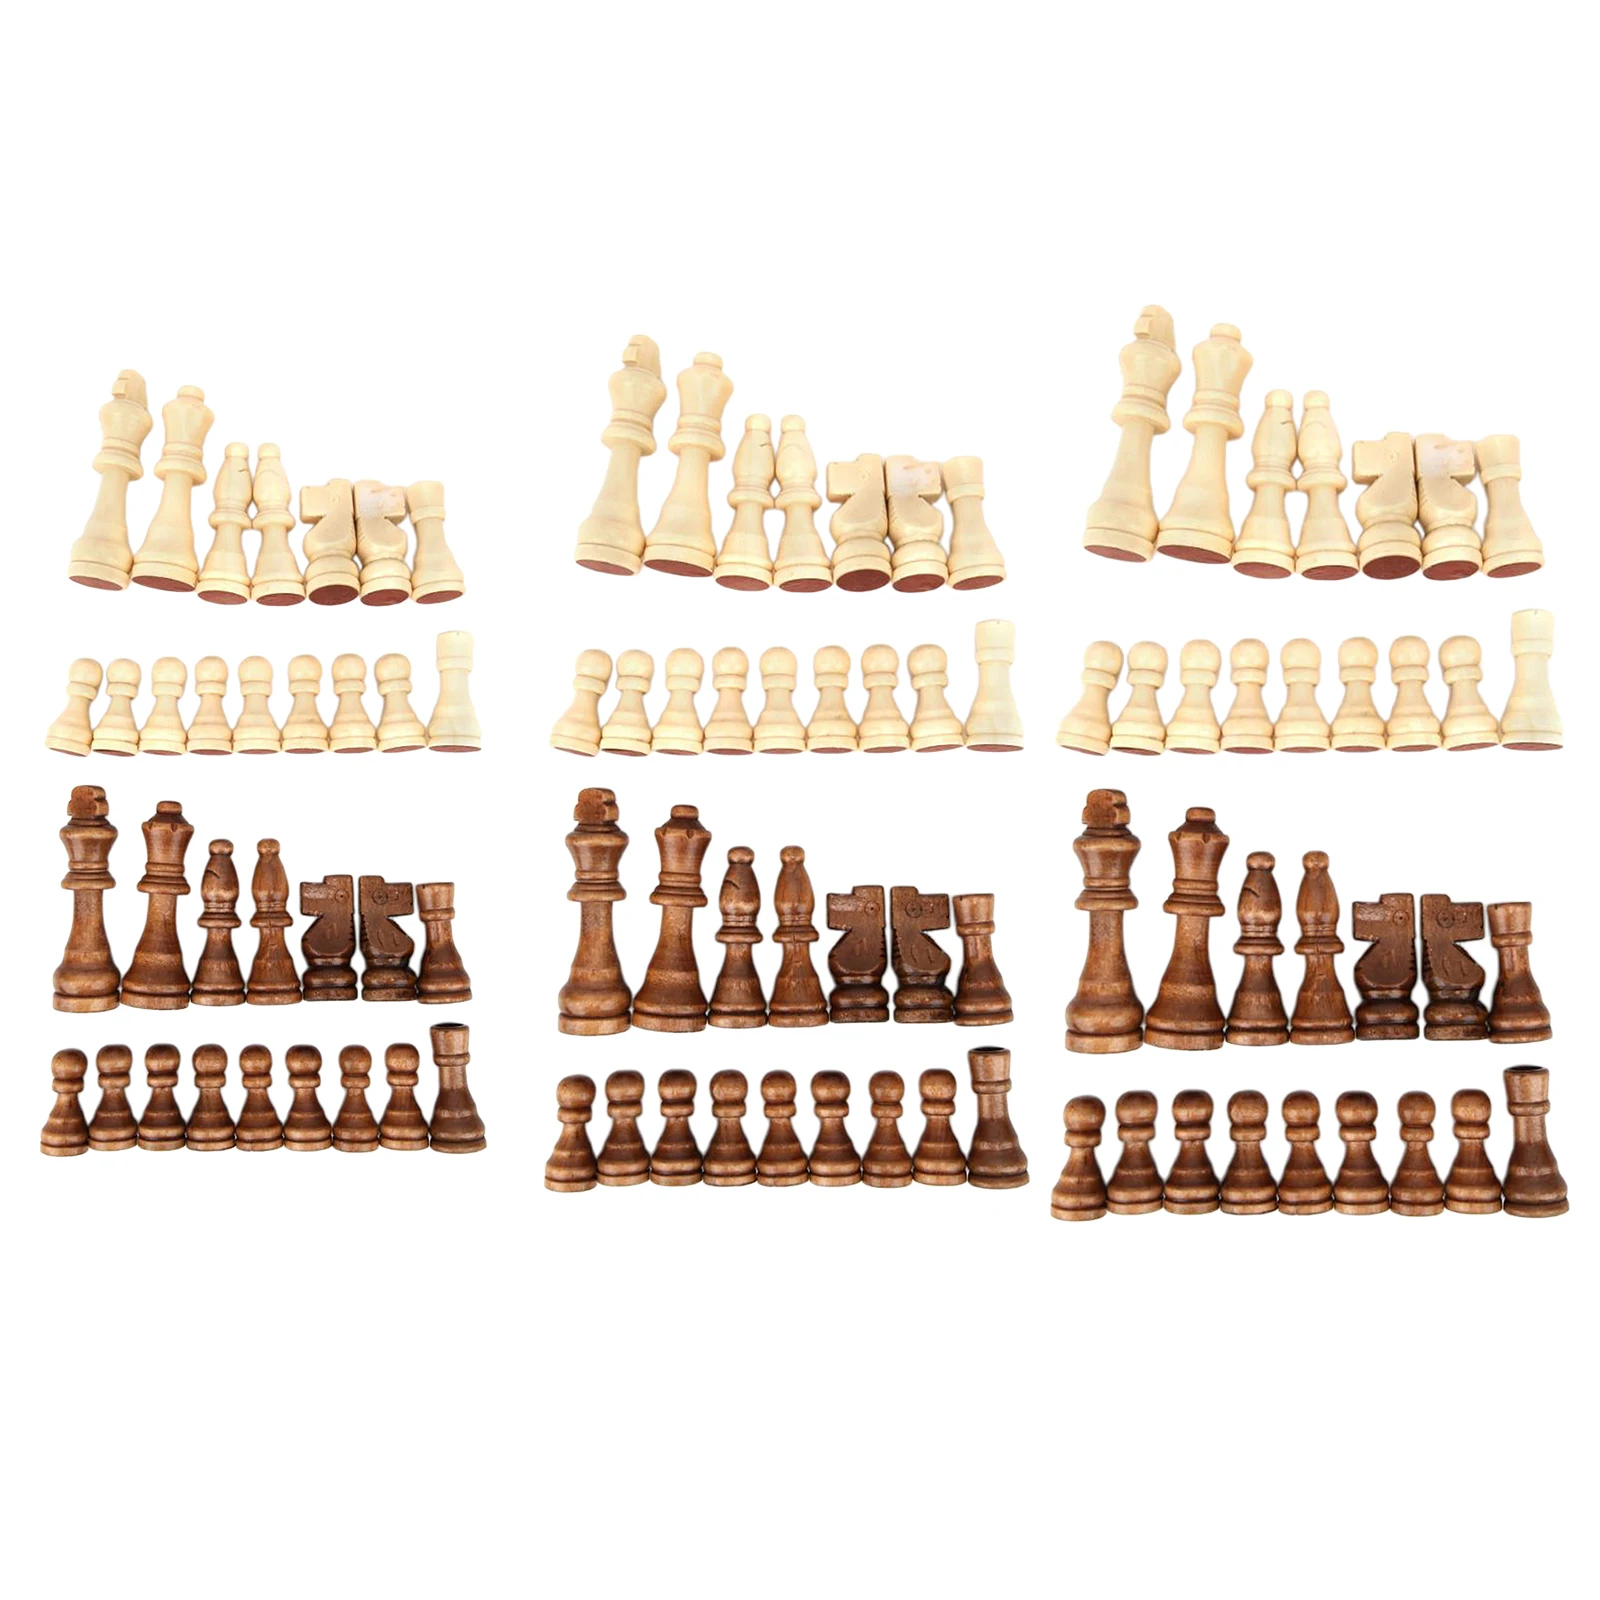 32pcs Wooden International Chess Piece Parent-Child Interaction Puzzle Toy Kids Toys Xmas Gifts